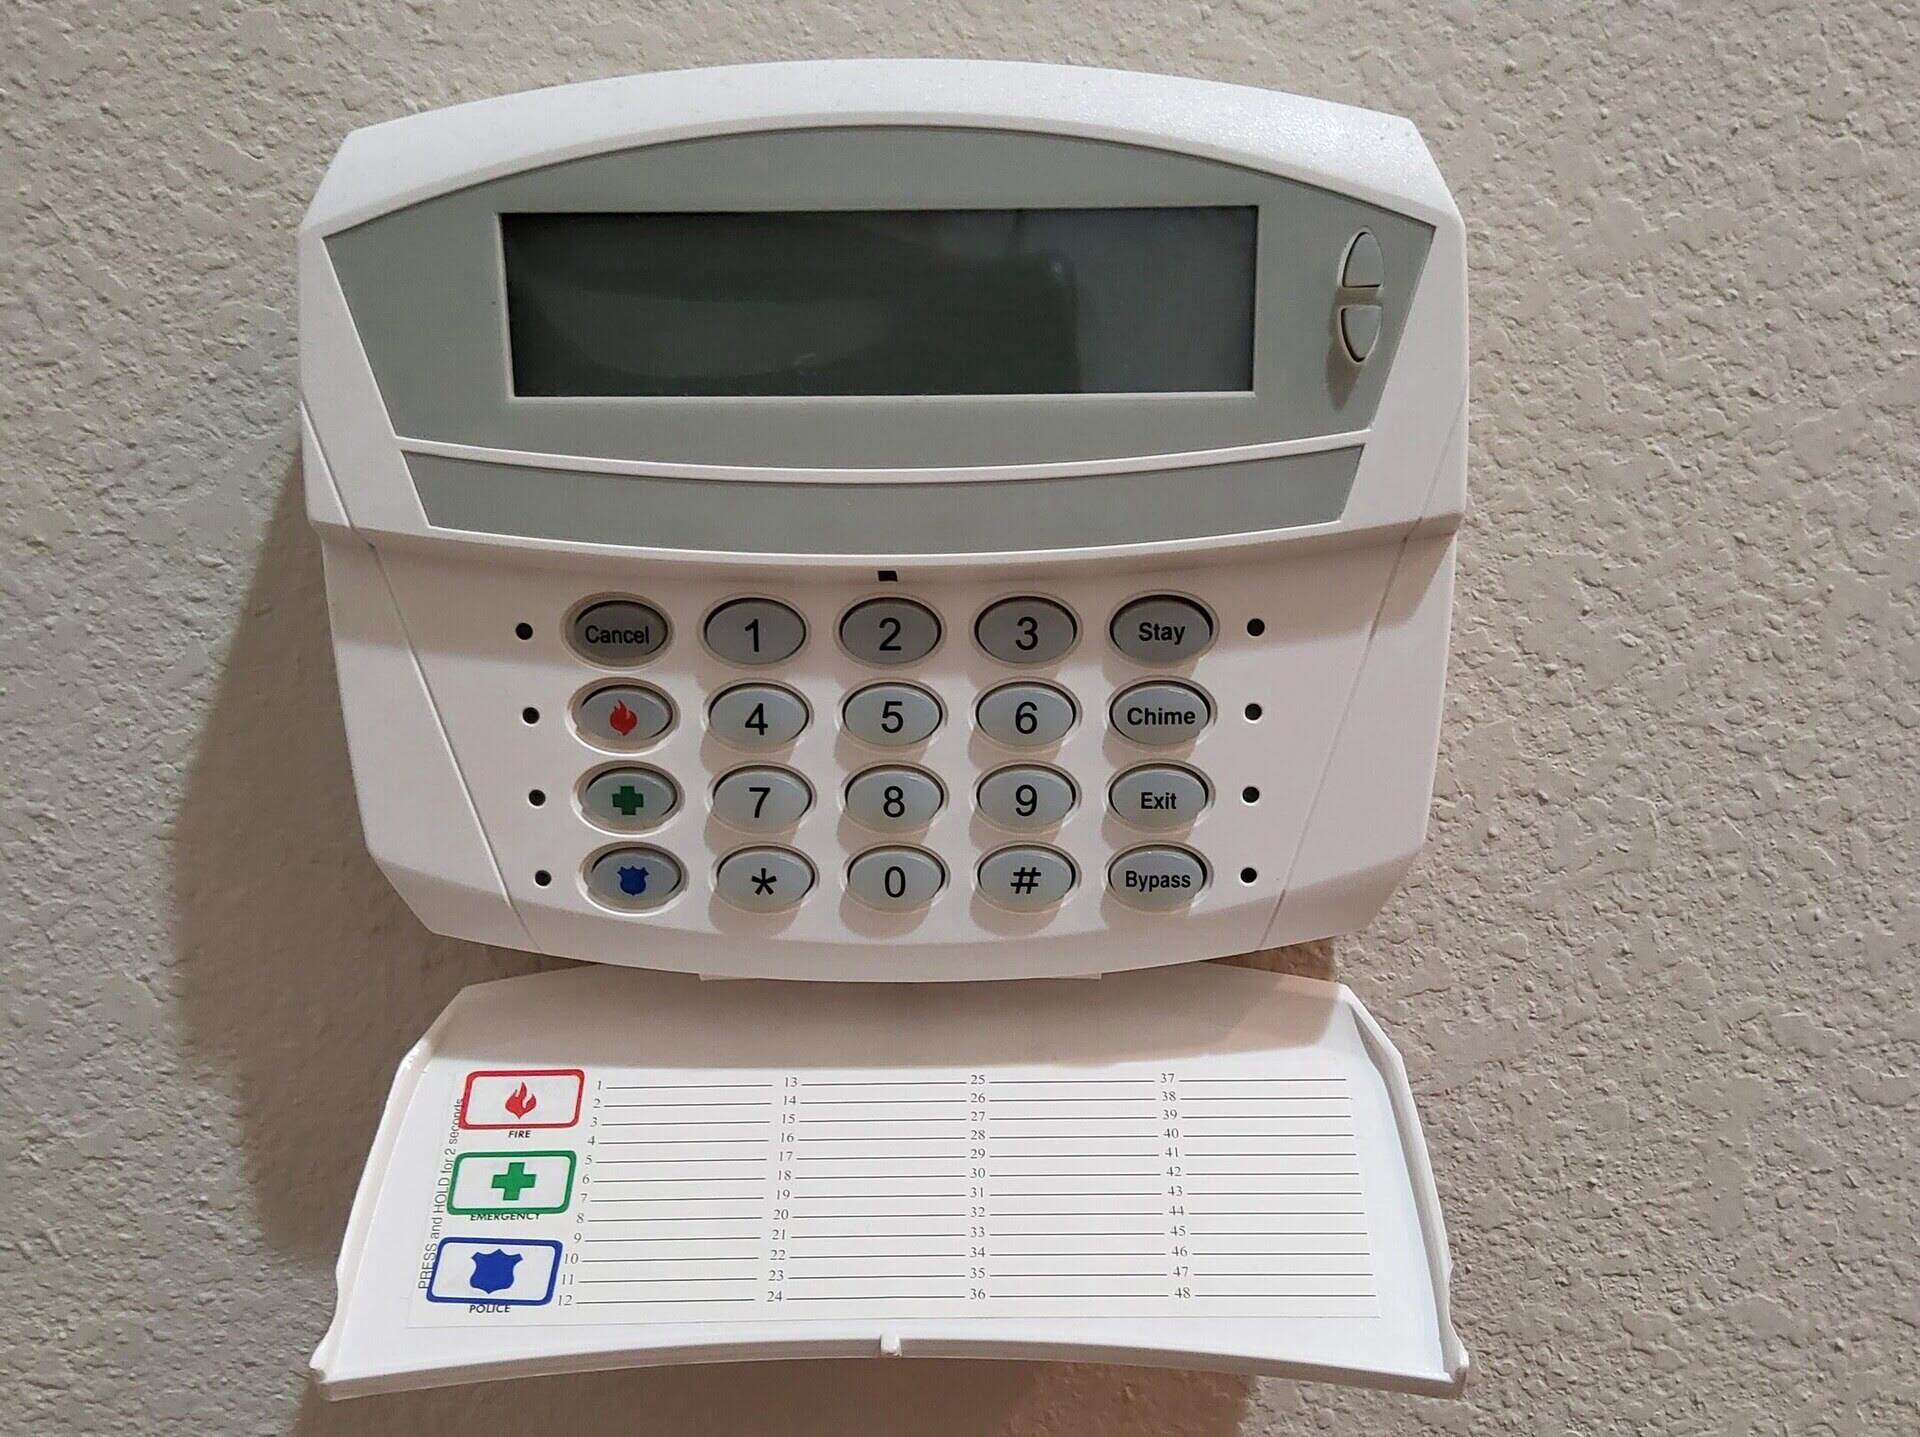 How To Remove The AC Power From A House Alarm Systems